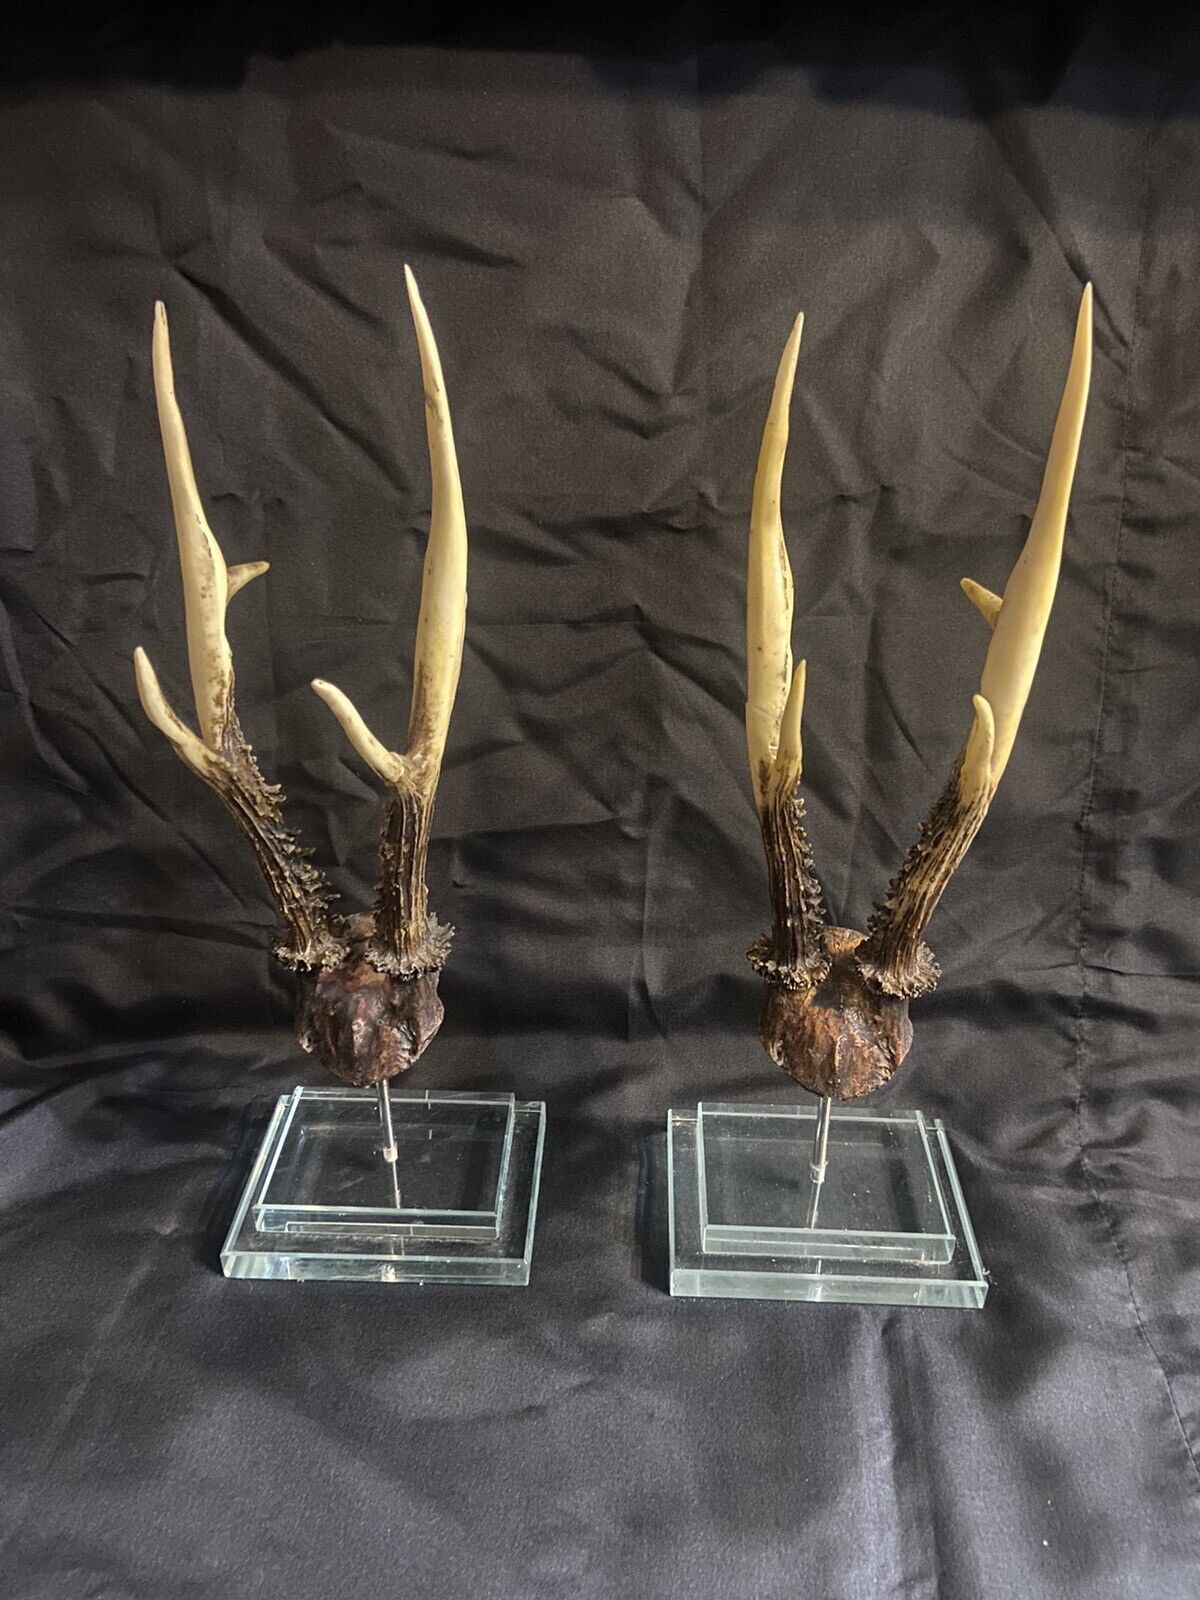 Pair Identical Antlers Mounted On Glass Lucite Bases Taxidermy Oddities 15” High